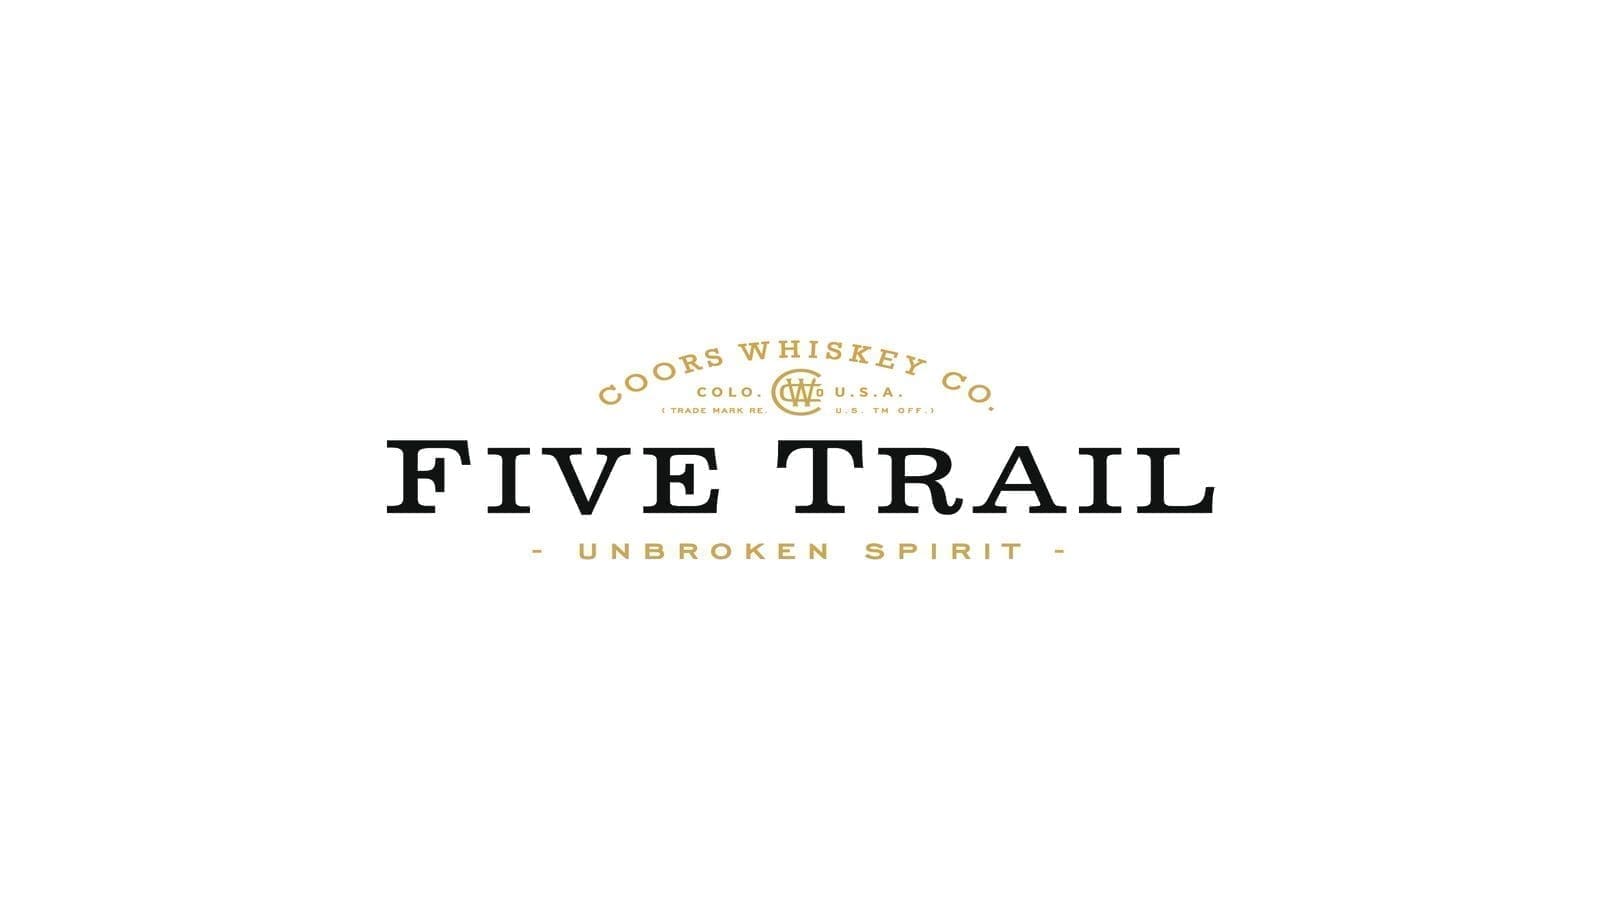 Molson Coors enters full-strength spirit market with launch of Five Trail blended American whiskey